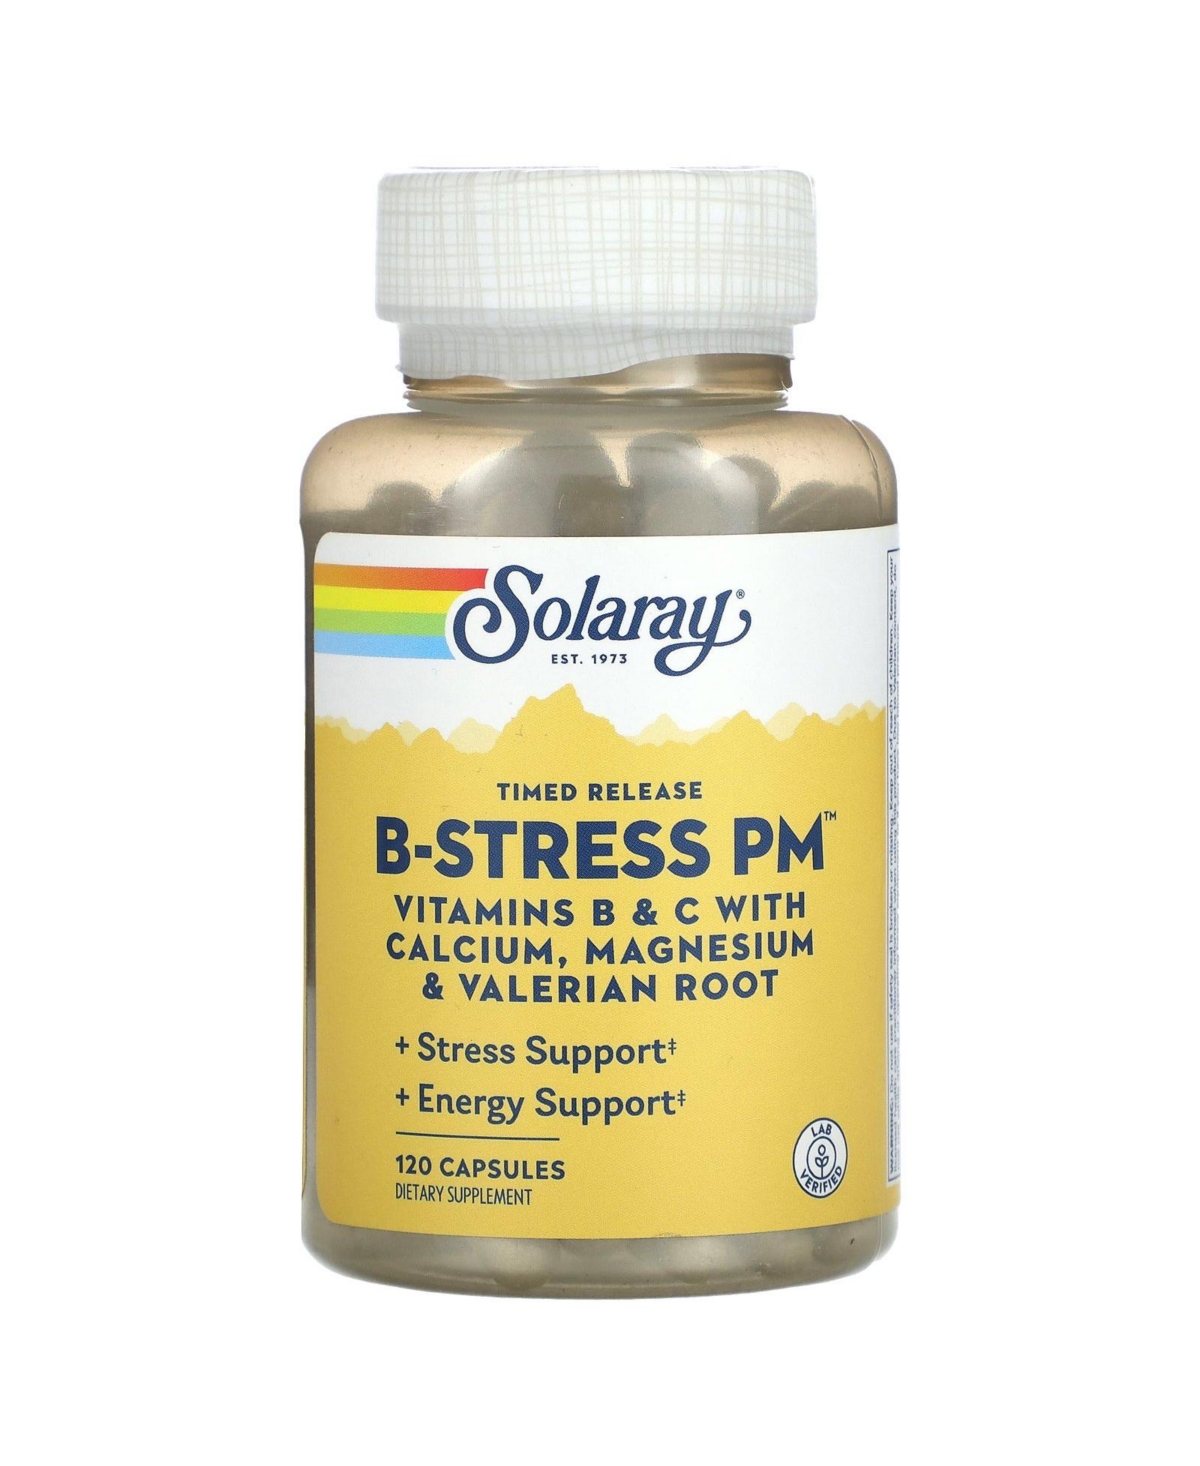 Timed Release Vitamin B-Stress Pm - 120 Capsules - Assorted Pre-pack (See Table